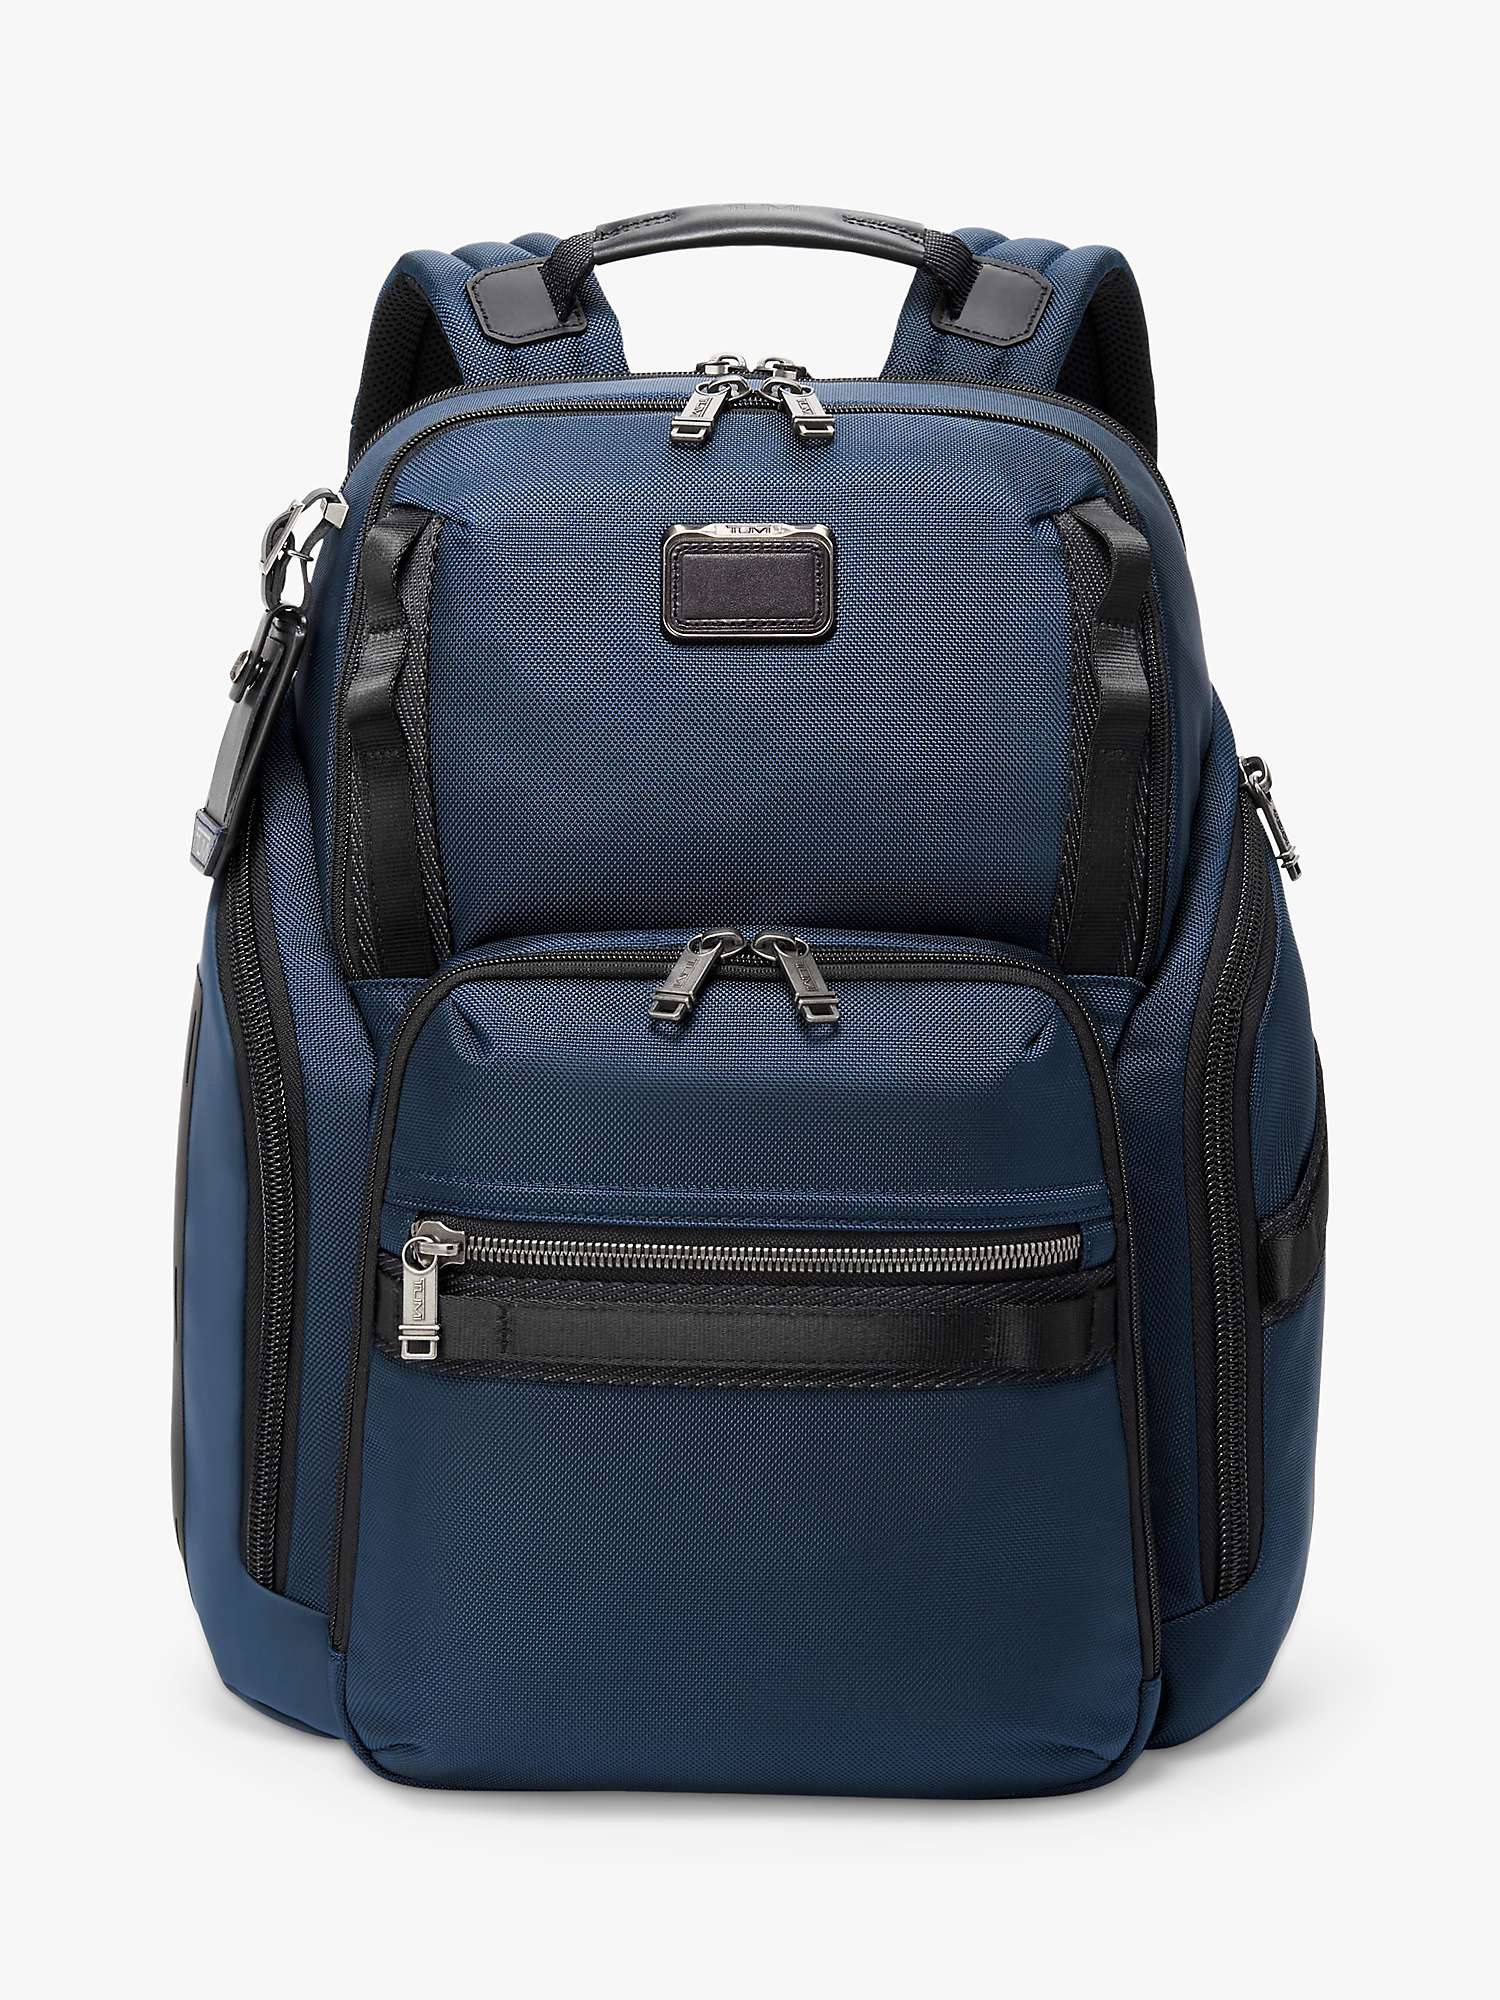 Buy TUMI Alpha Bravo Search Backpack Online at johnlewis.com